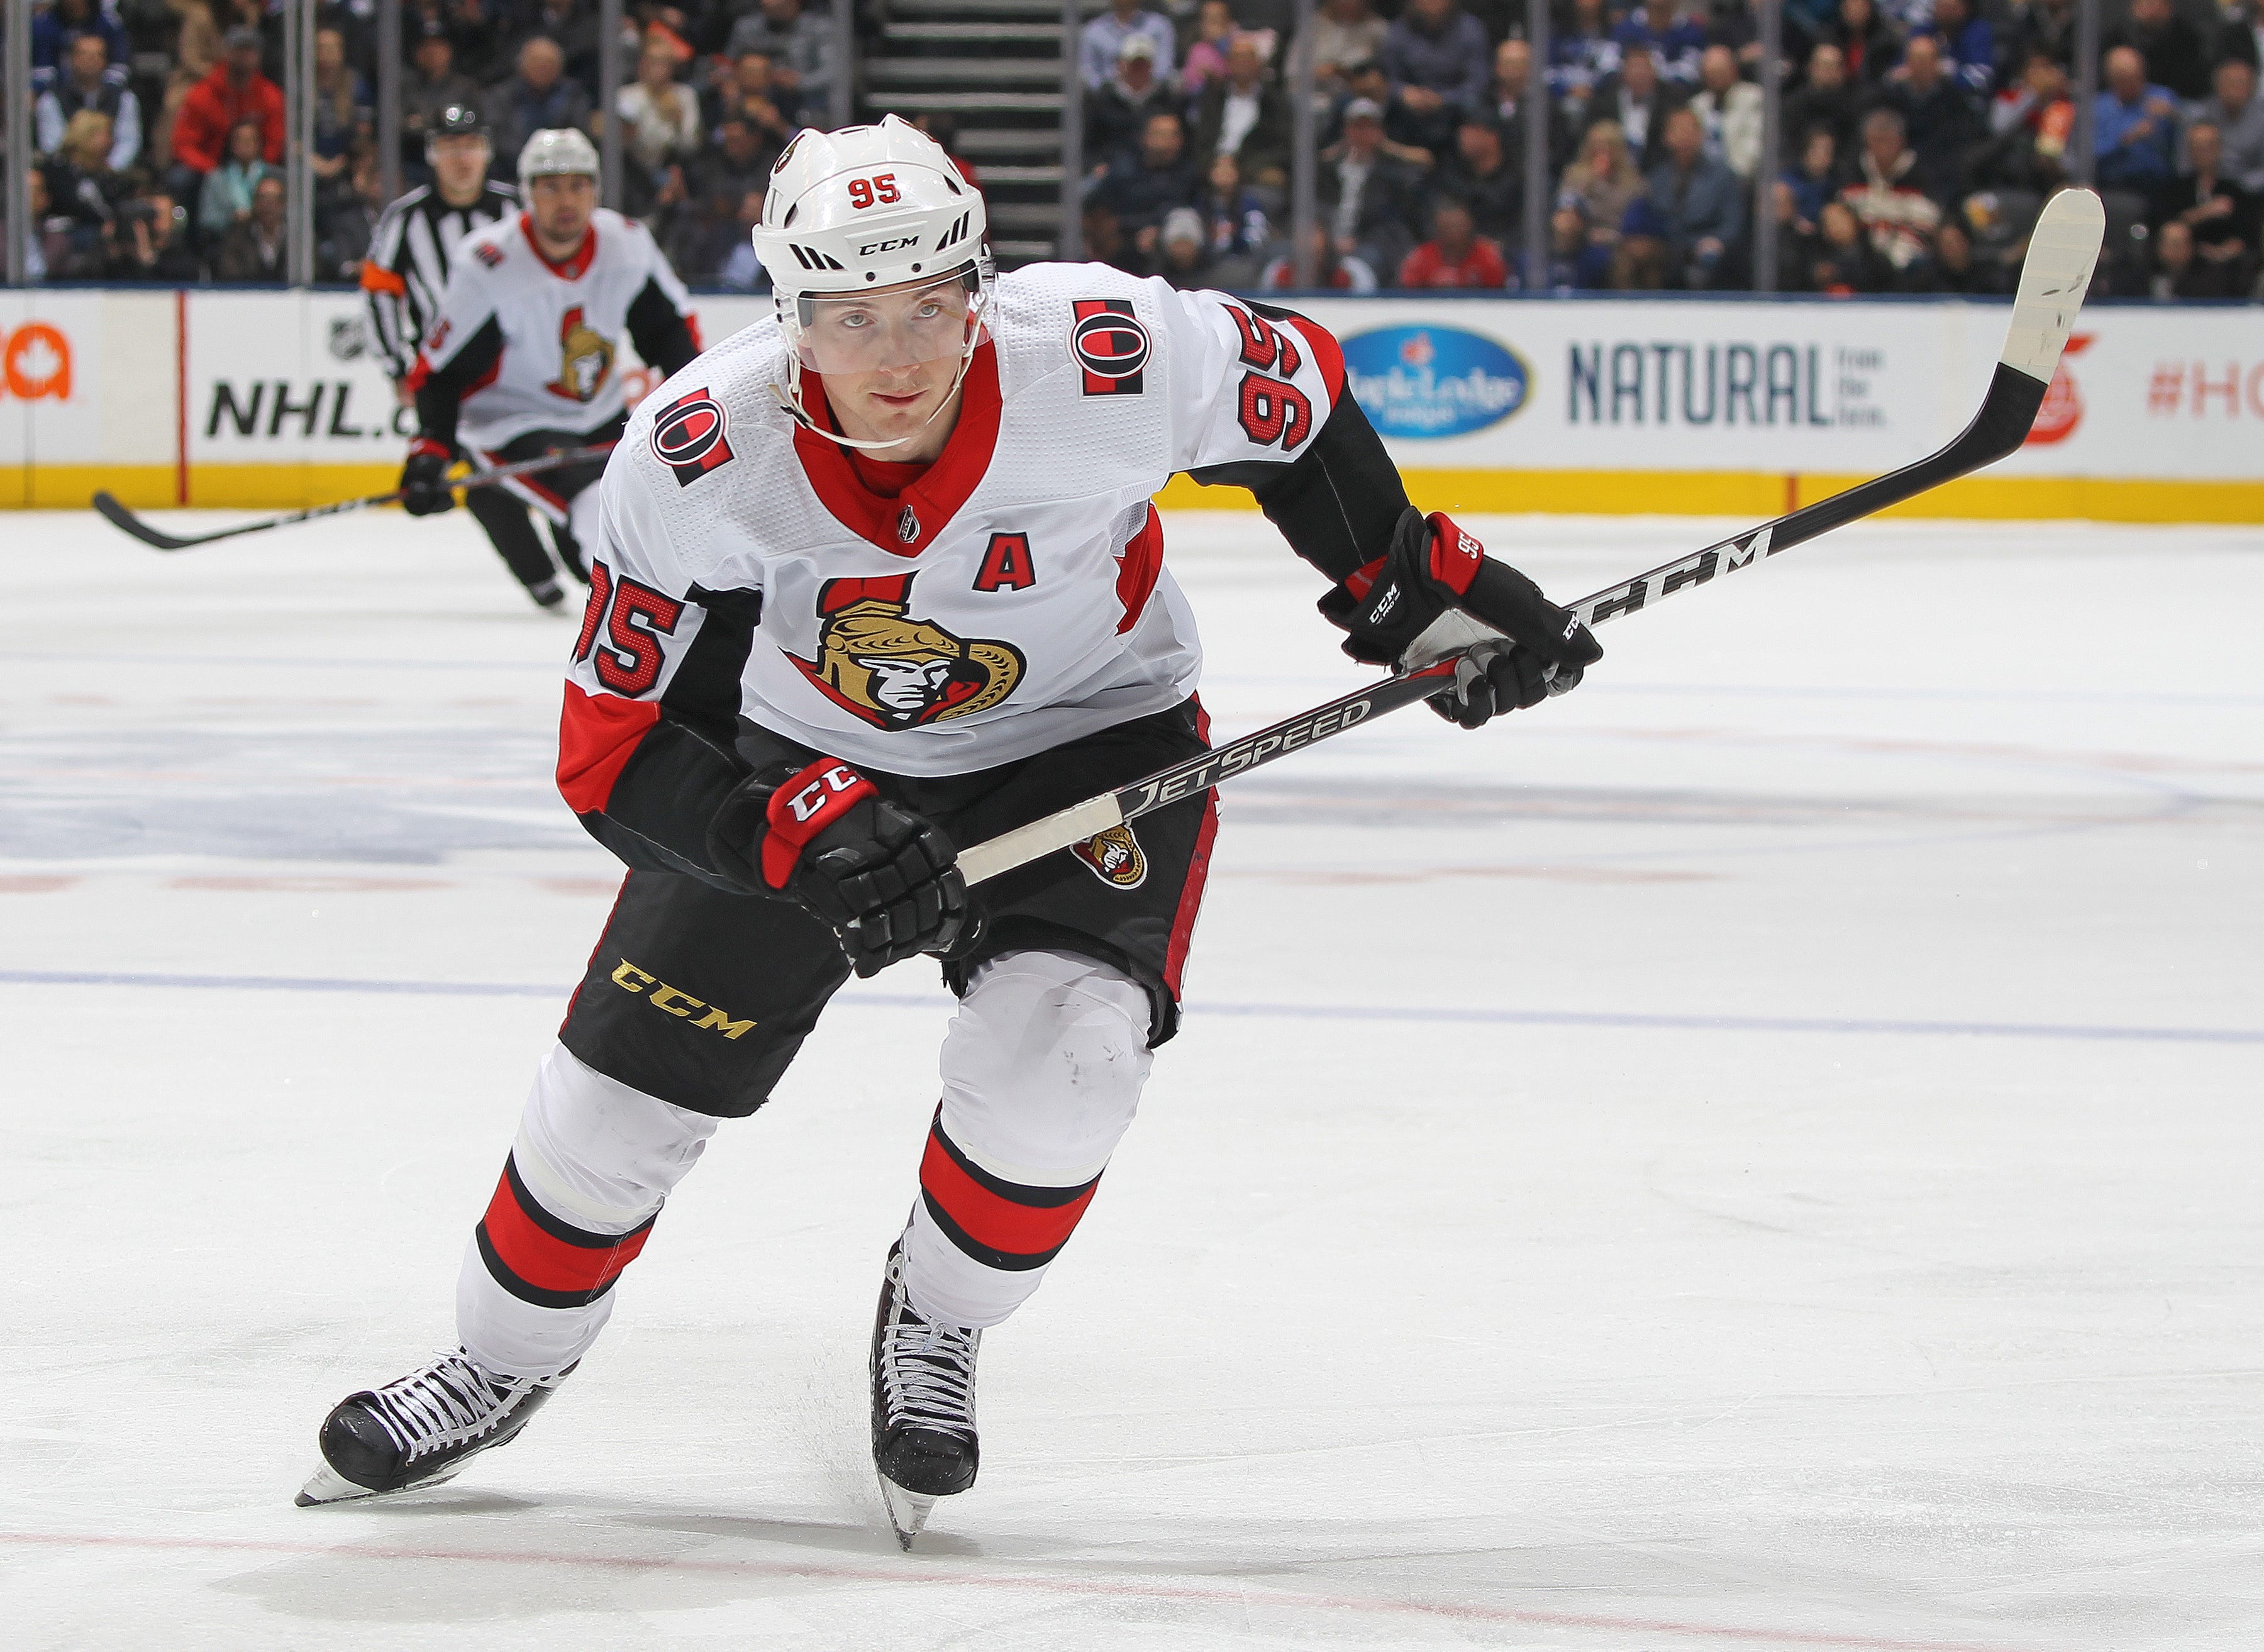 3. Matt Duchene, C, Ottawa: The Senators gave up what is turning out to be the No. 1 overall pick in June’s draft to Colorado for Duchene. And if they don’t re-sign him, they’ll trade him. That is painful.